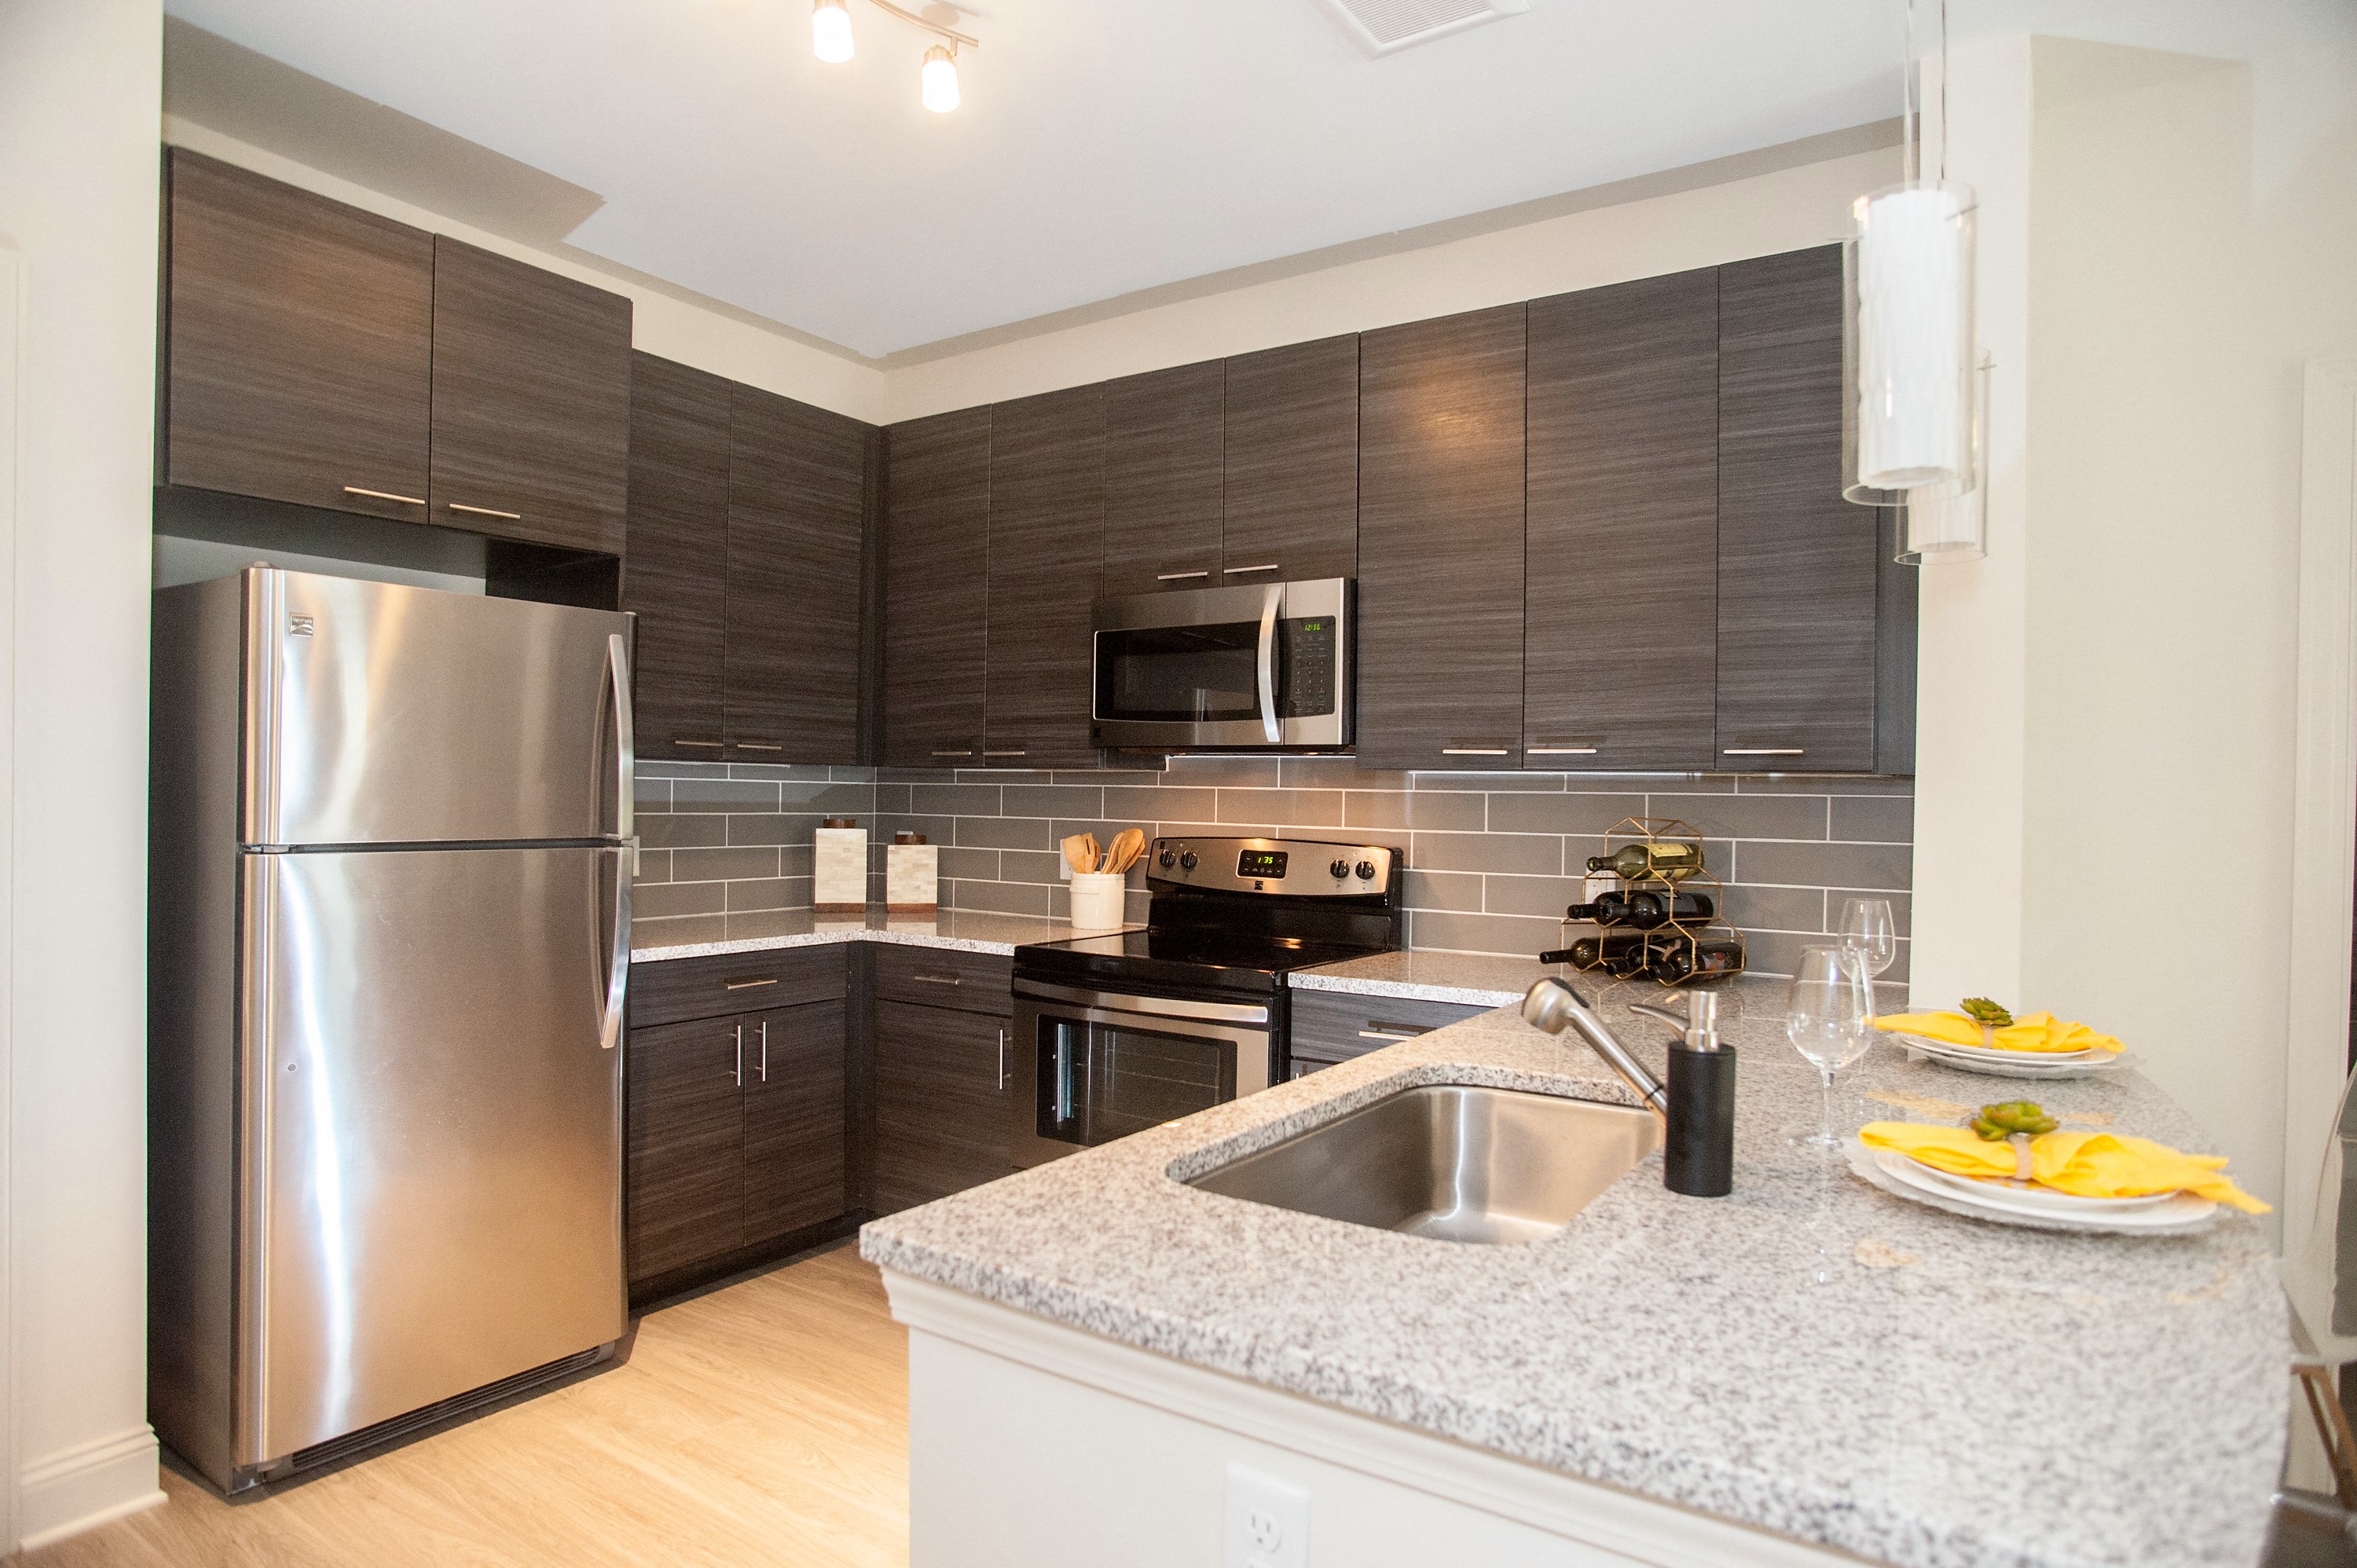 Model kitchen counters at Fifth Street Place Apartments, Virginia, 22903